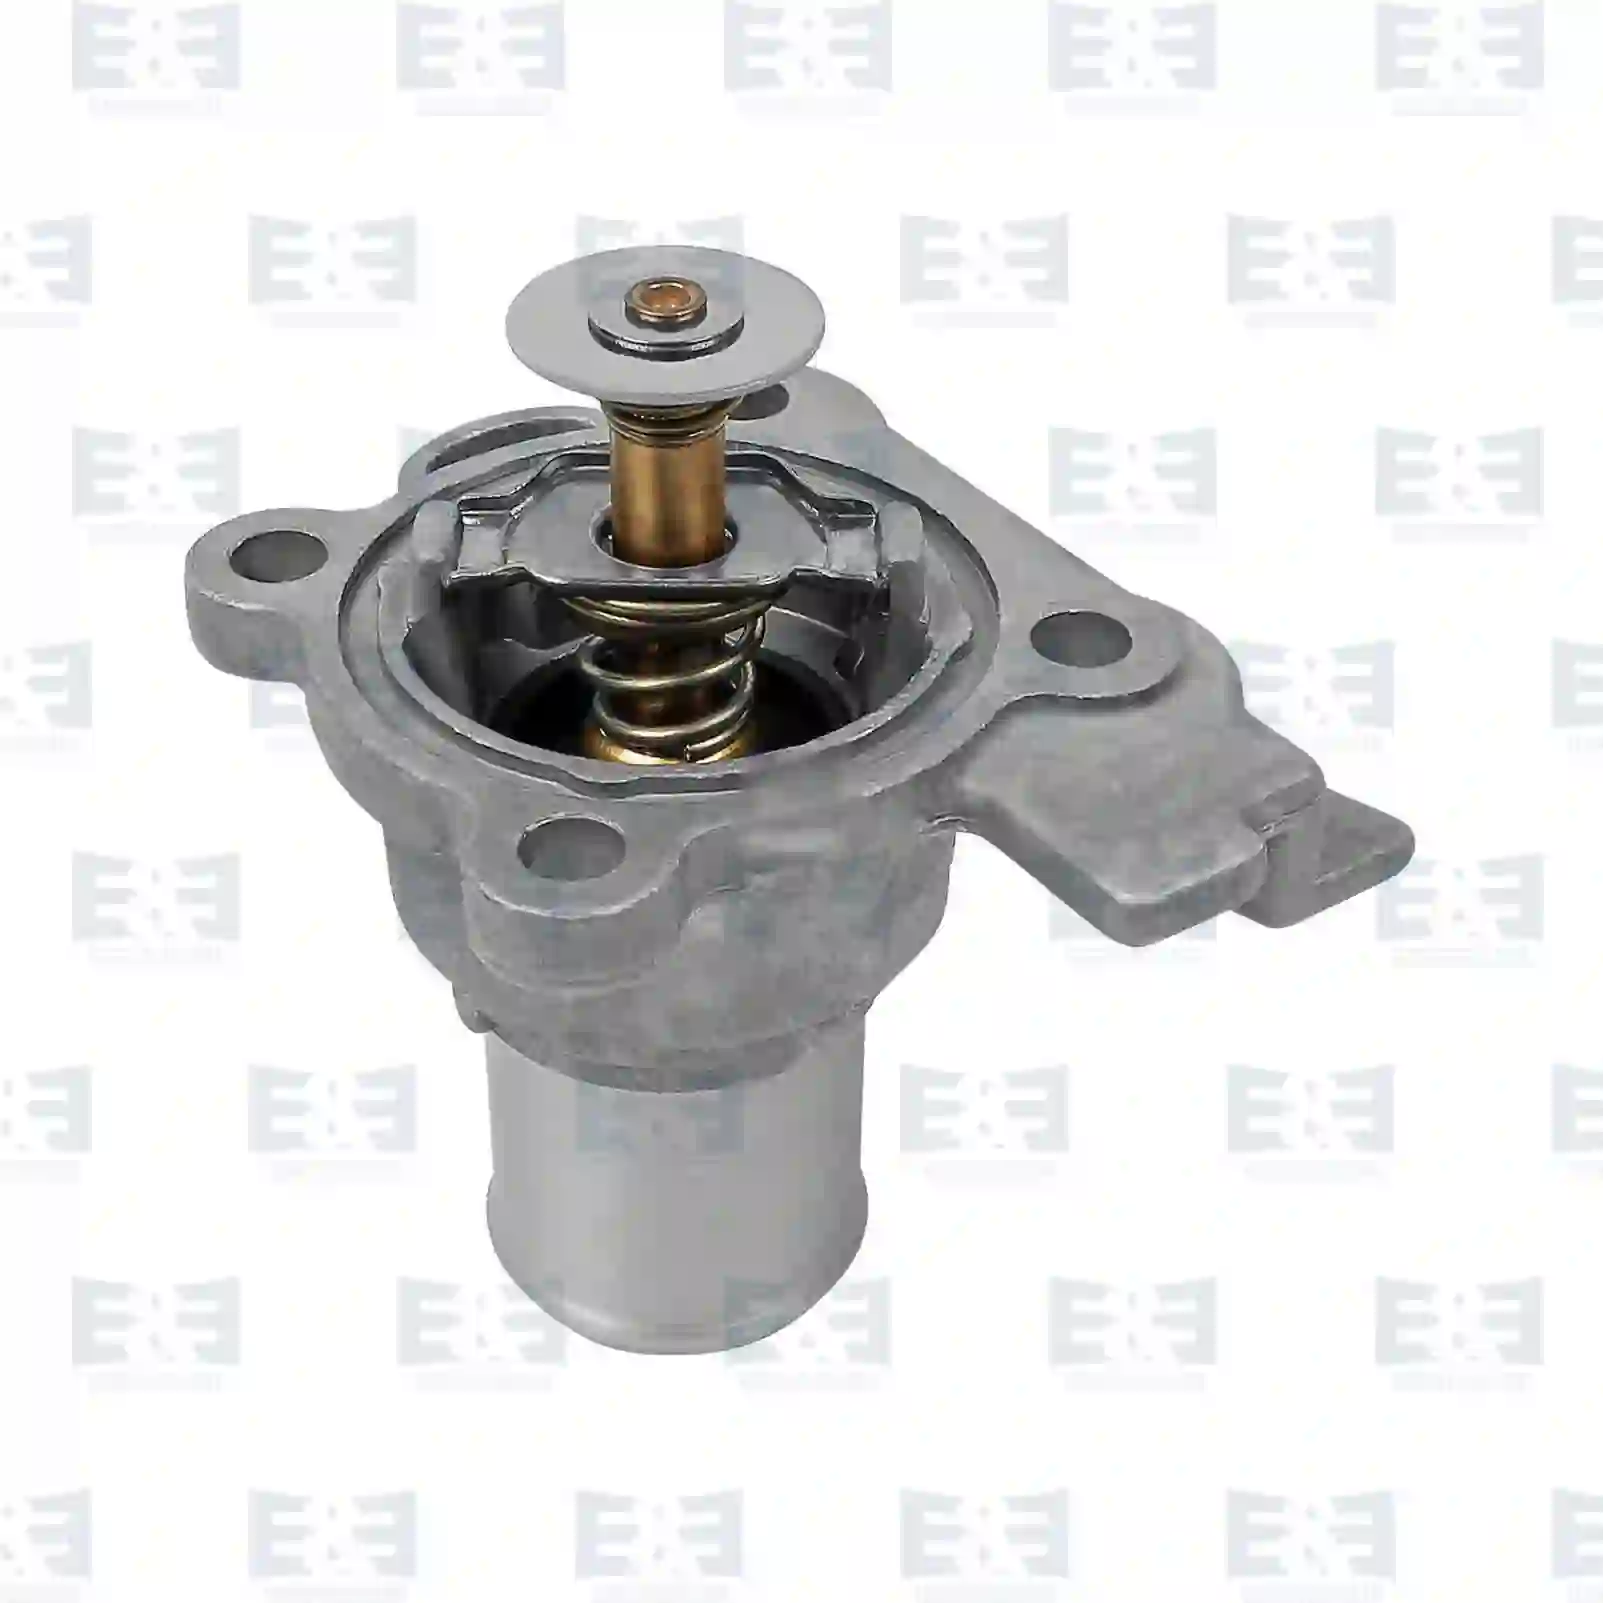 Thermostat Thermostat, EE No 2E2203698 ,  oem no:504013931, 504017209, 504013931, 504017209, 504029725, 504387382, 504017209, 504029725, 504013931, 504017209 E&E Truck Spare Parts | Truck Spare Parts, Auotomotive Spare Parts